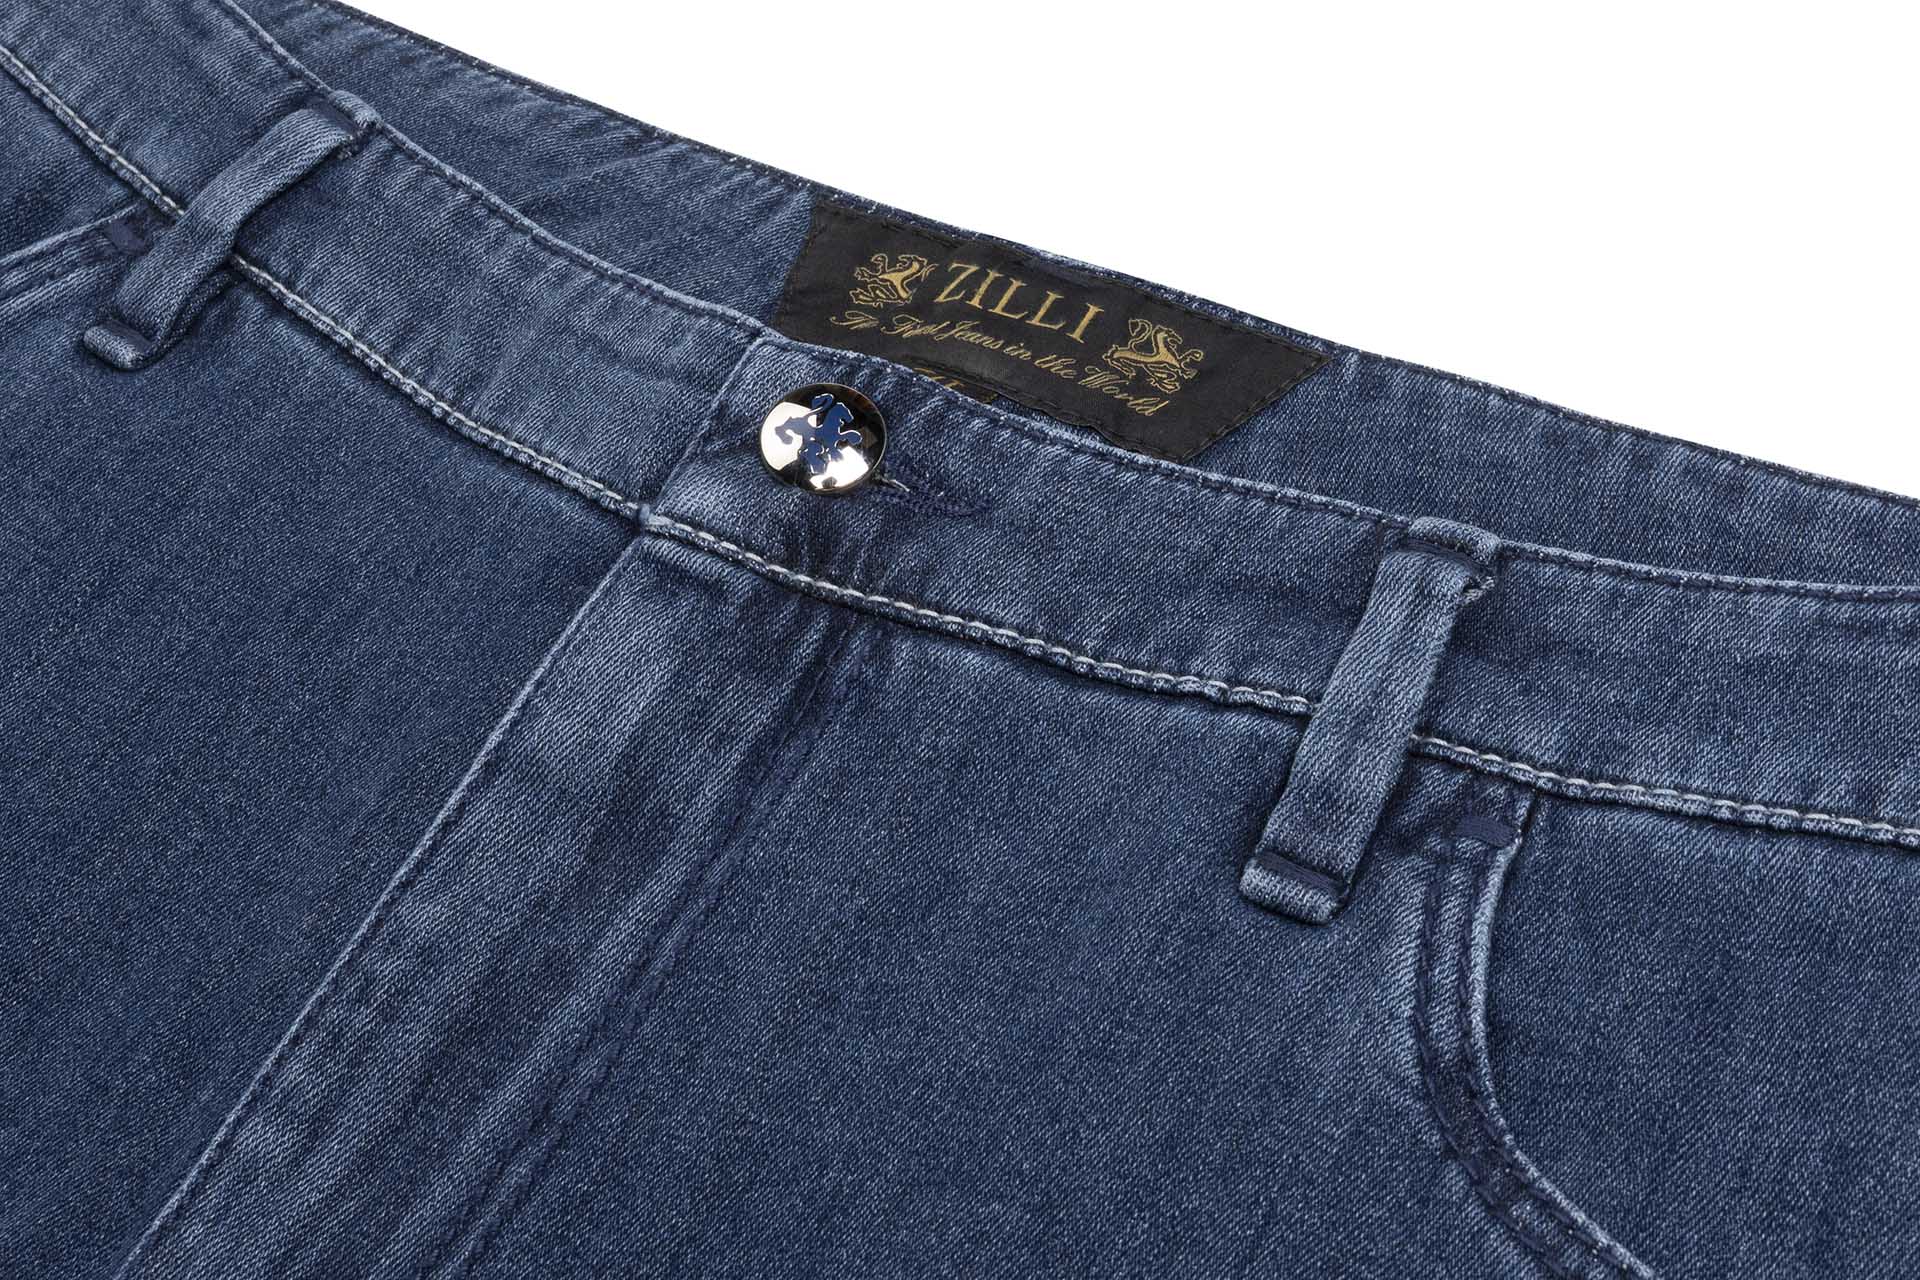 Slim Fit Jeans Griffon Embroidery with Alligator Details - ZILLI